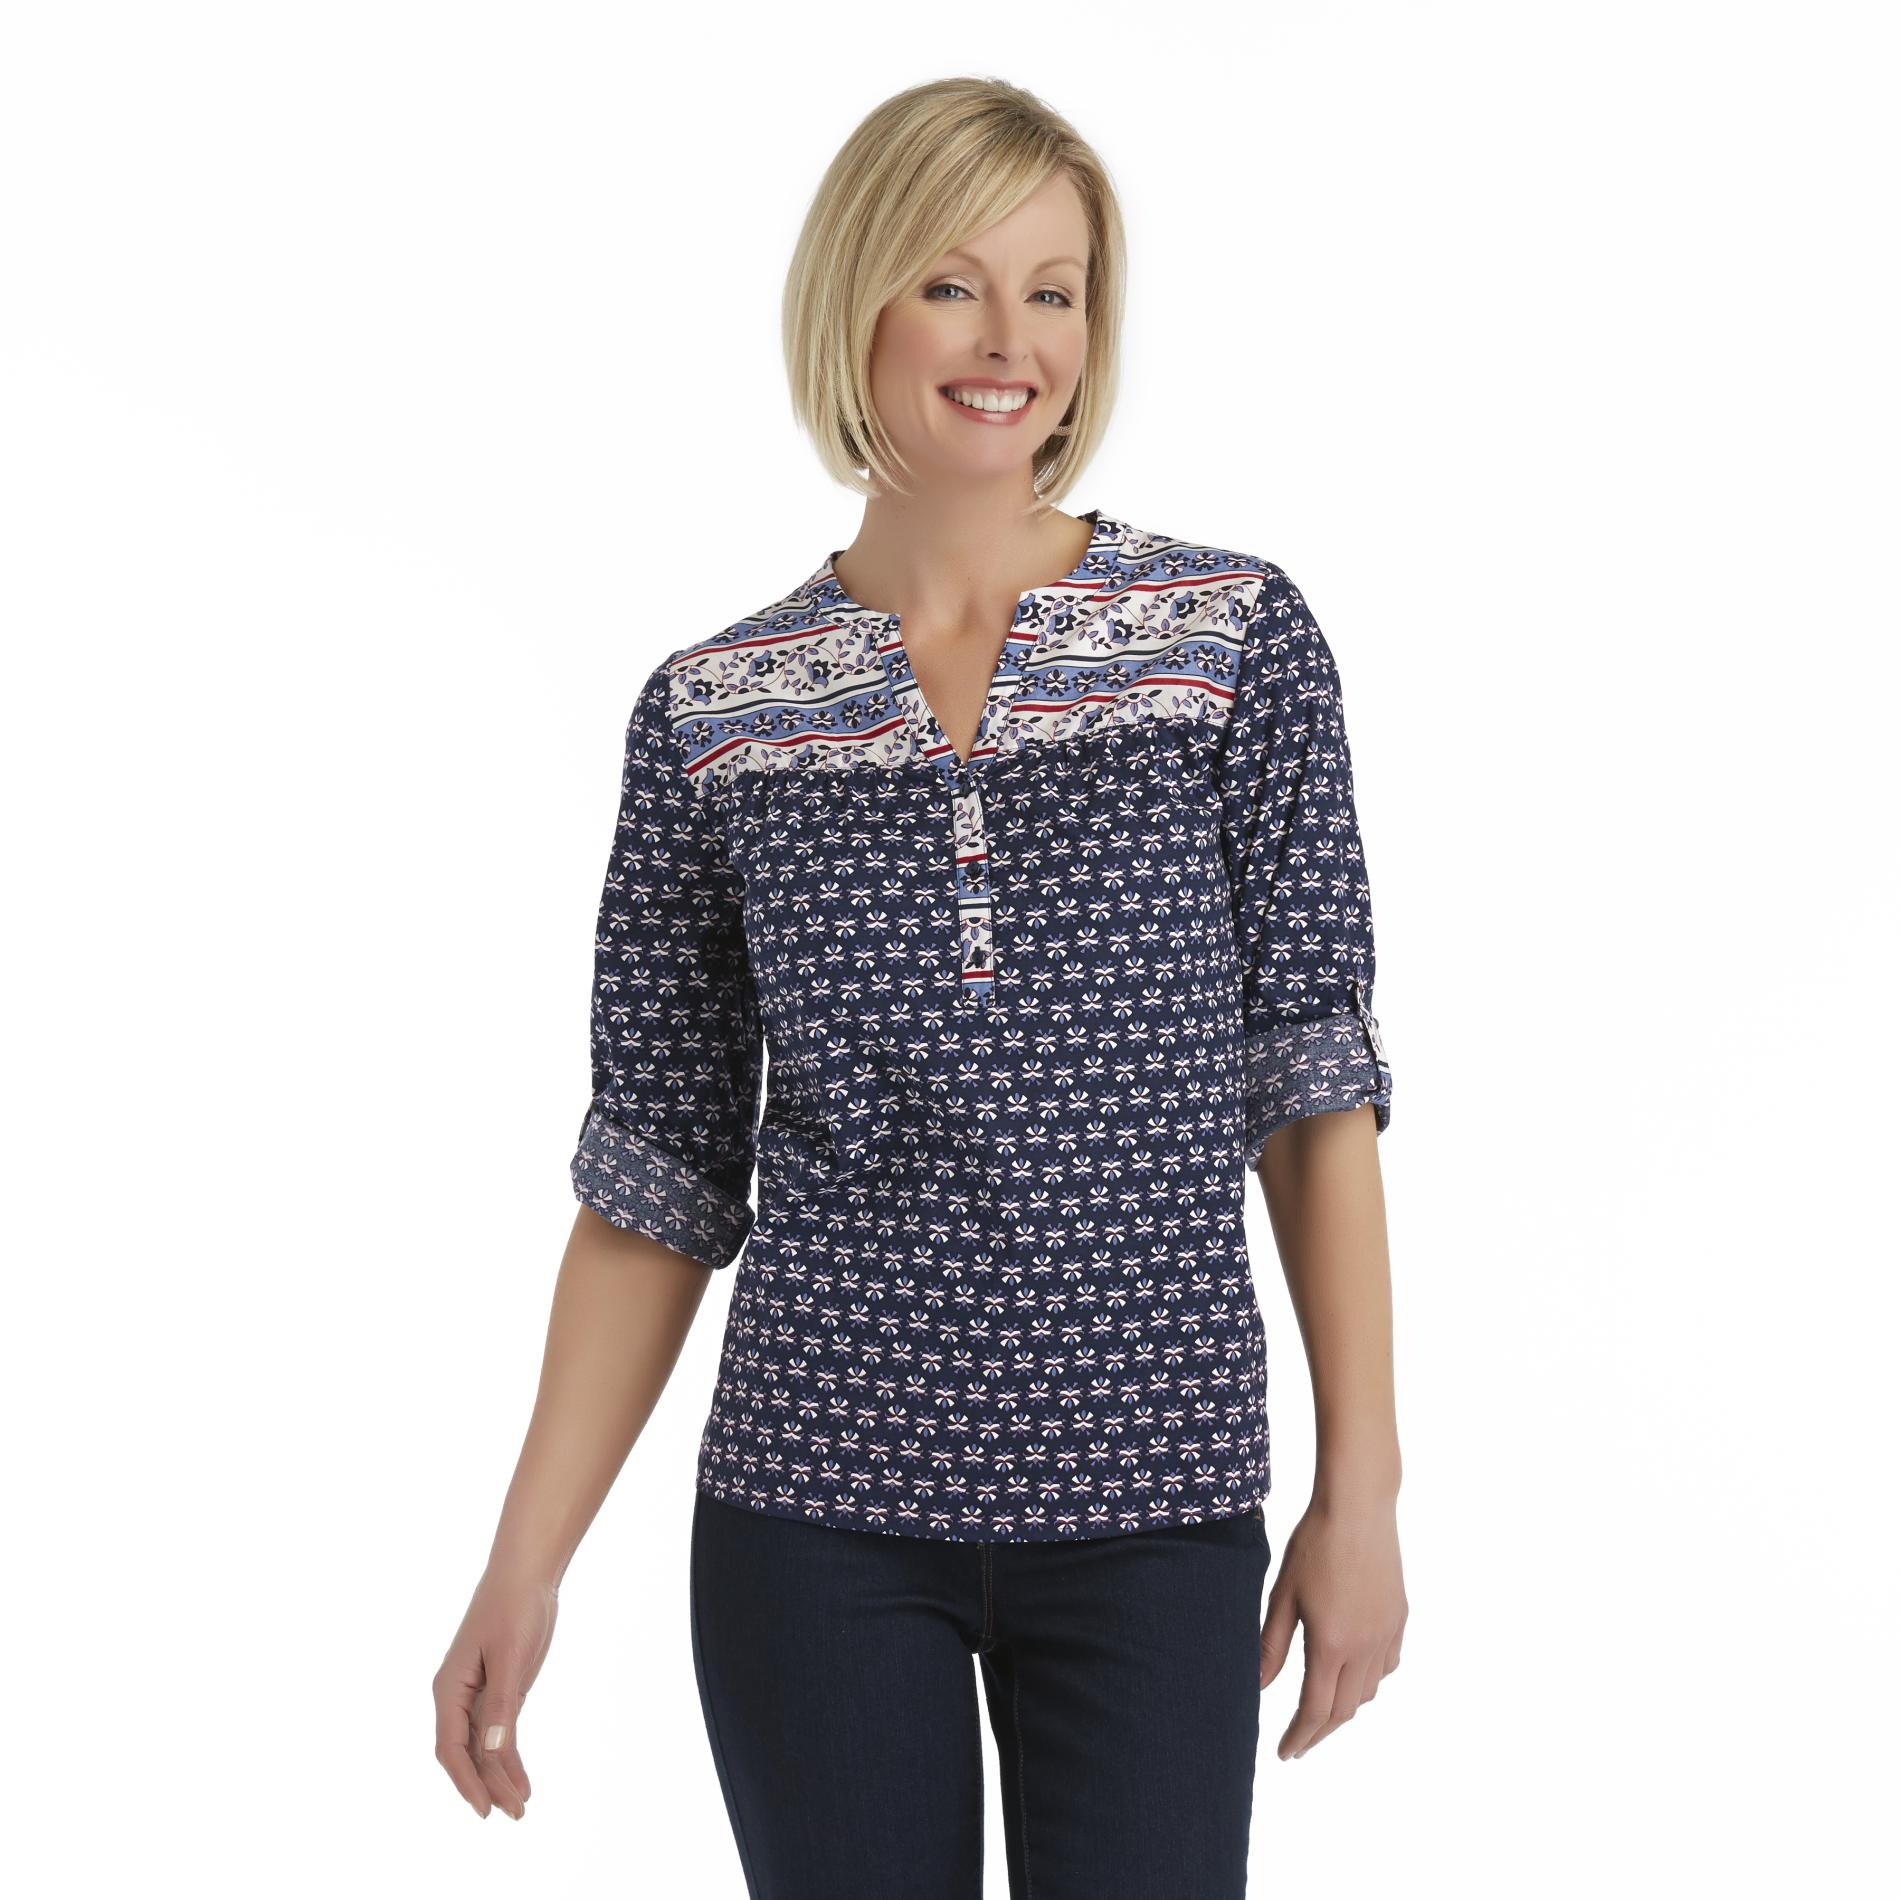 Basic Editions Women's Tunic Top - Floral